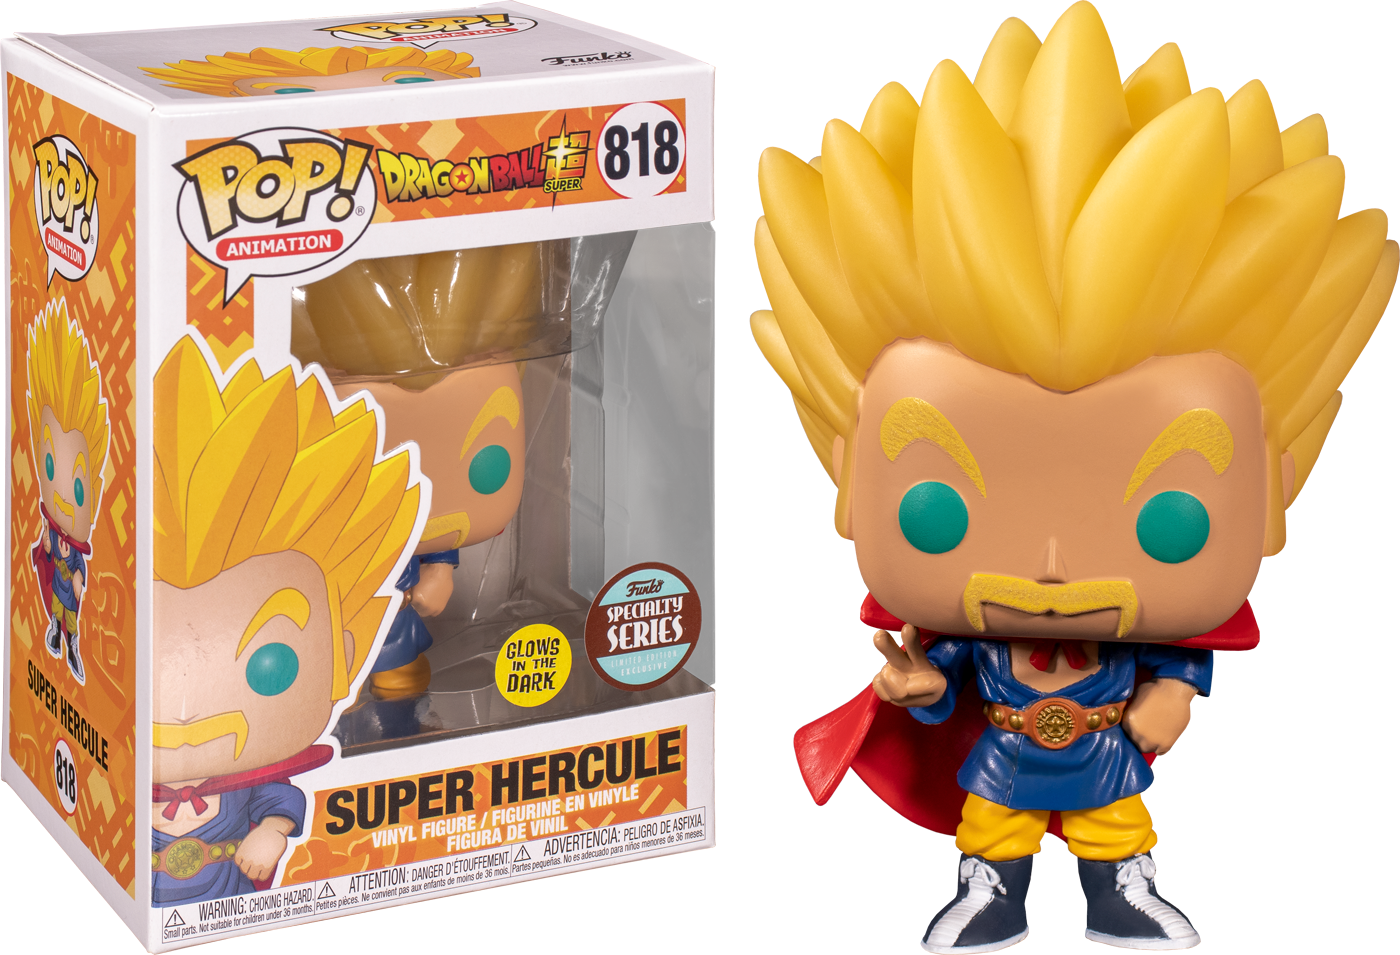 Dragon Ball Z Funko Pop Online Discount Shop For Electronics Apparel Toys Books Games Computers Shoes Jewelry Watches Baby Products Sports Outdoors Office Products Bed Bath Furniture Tools Hardware